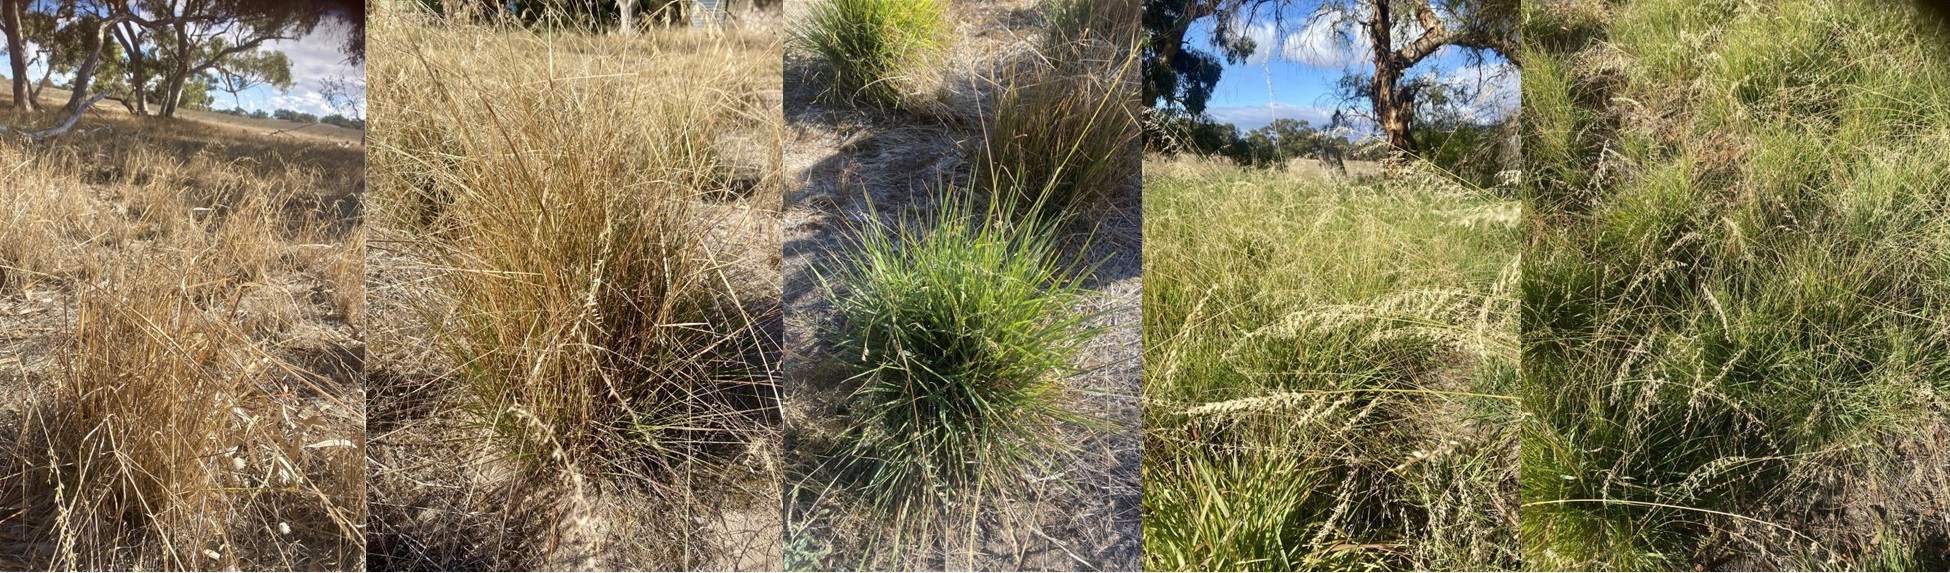 Veldt Grass at different growth stages